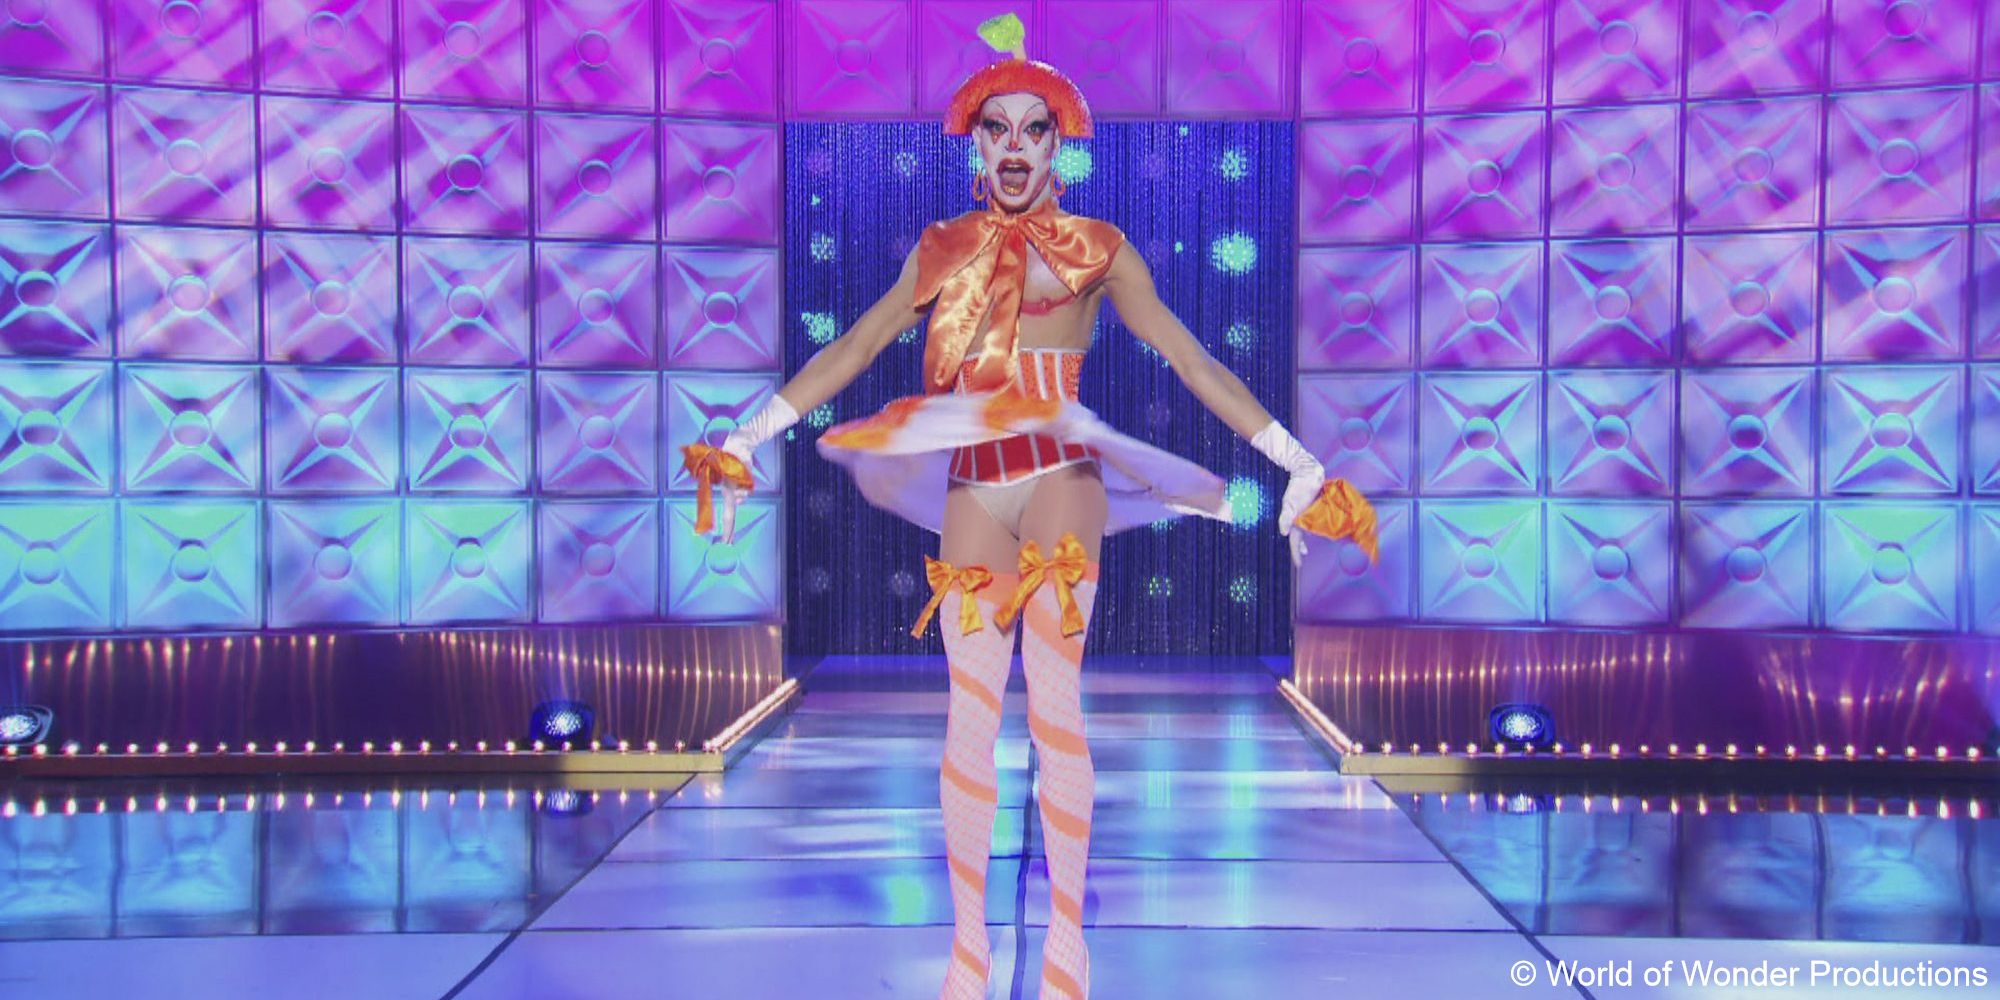 A still of drag queen Yvie Oddly wearing an orange tutu outfit, including a citrus headpiece